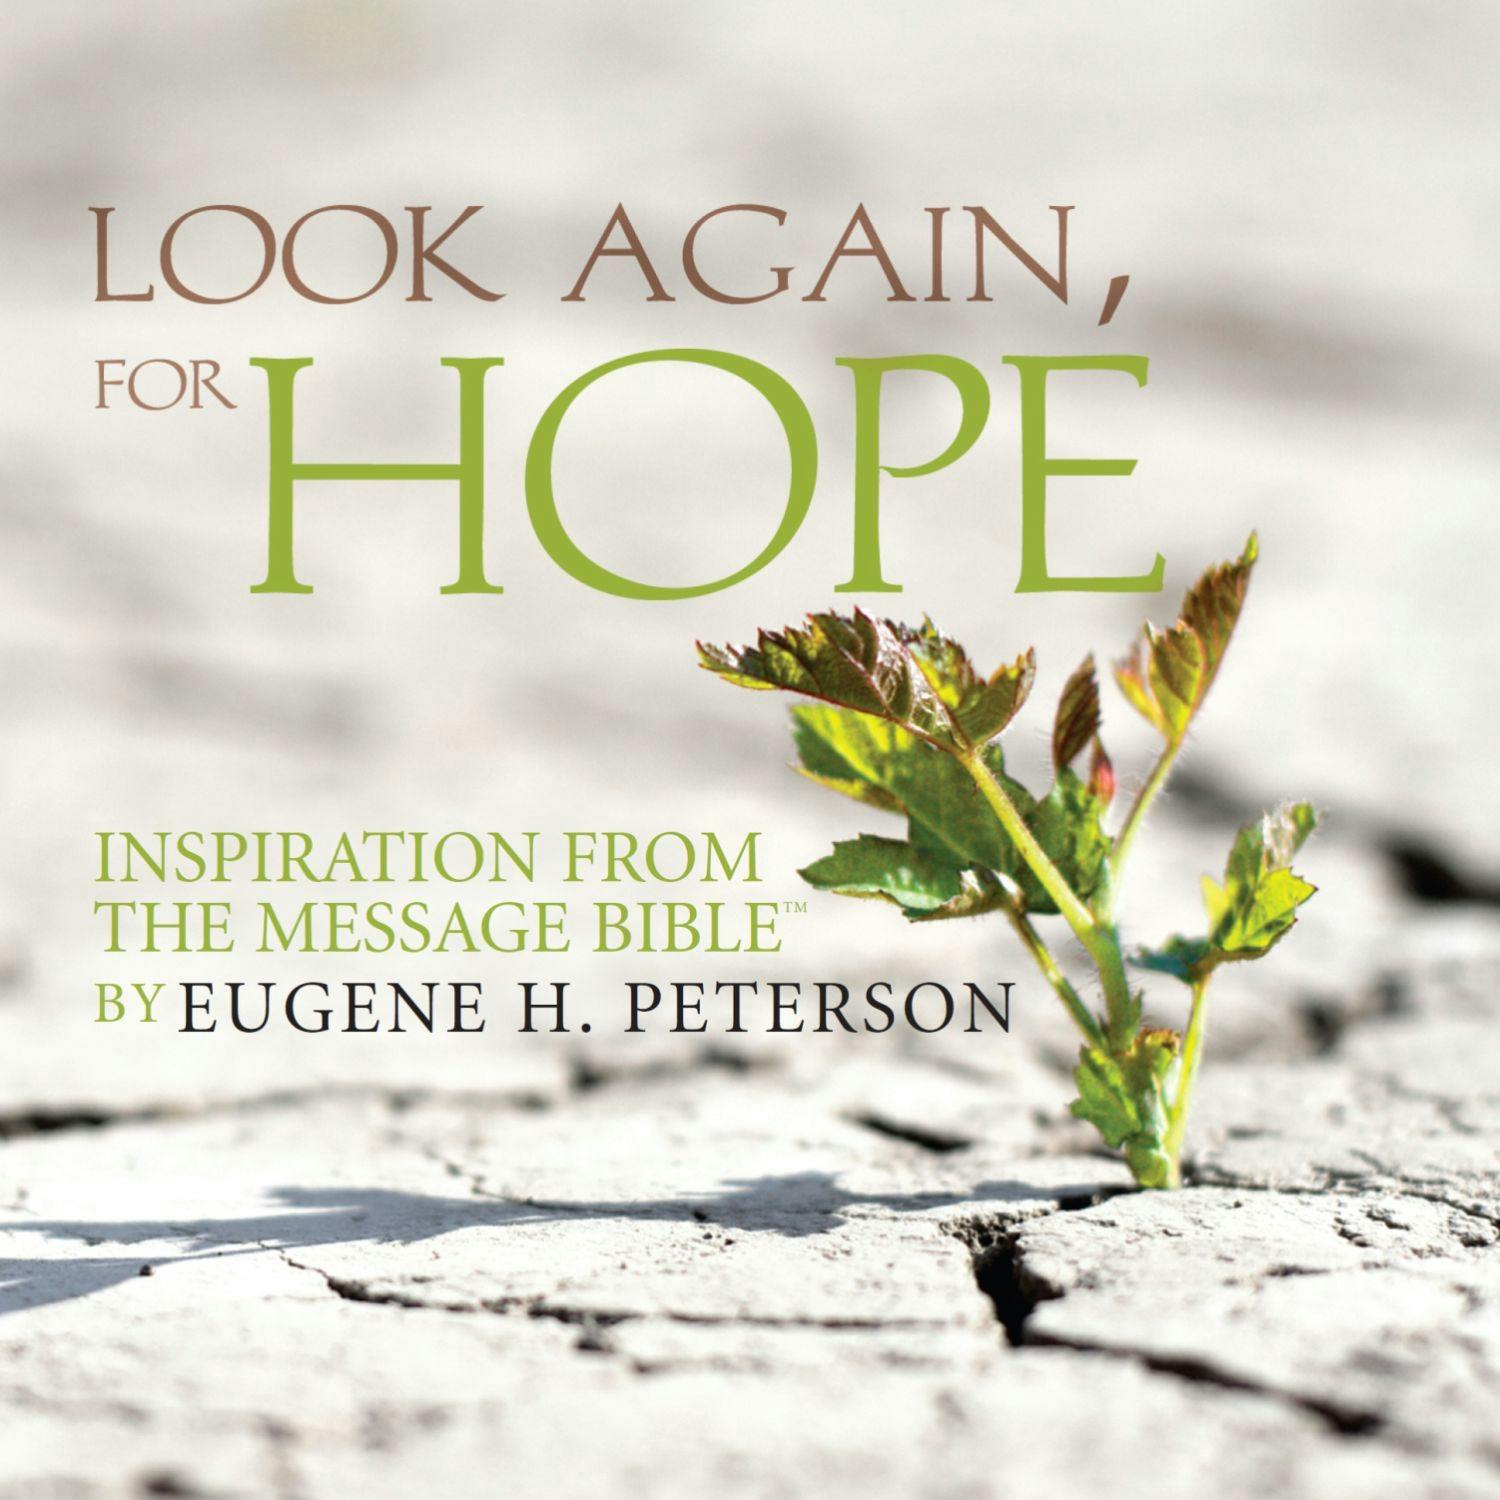 Look Again, for Hope - Eugene H Peterson